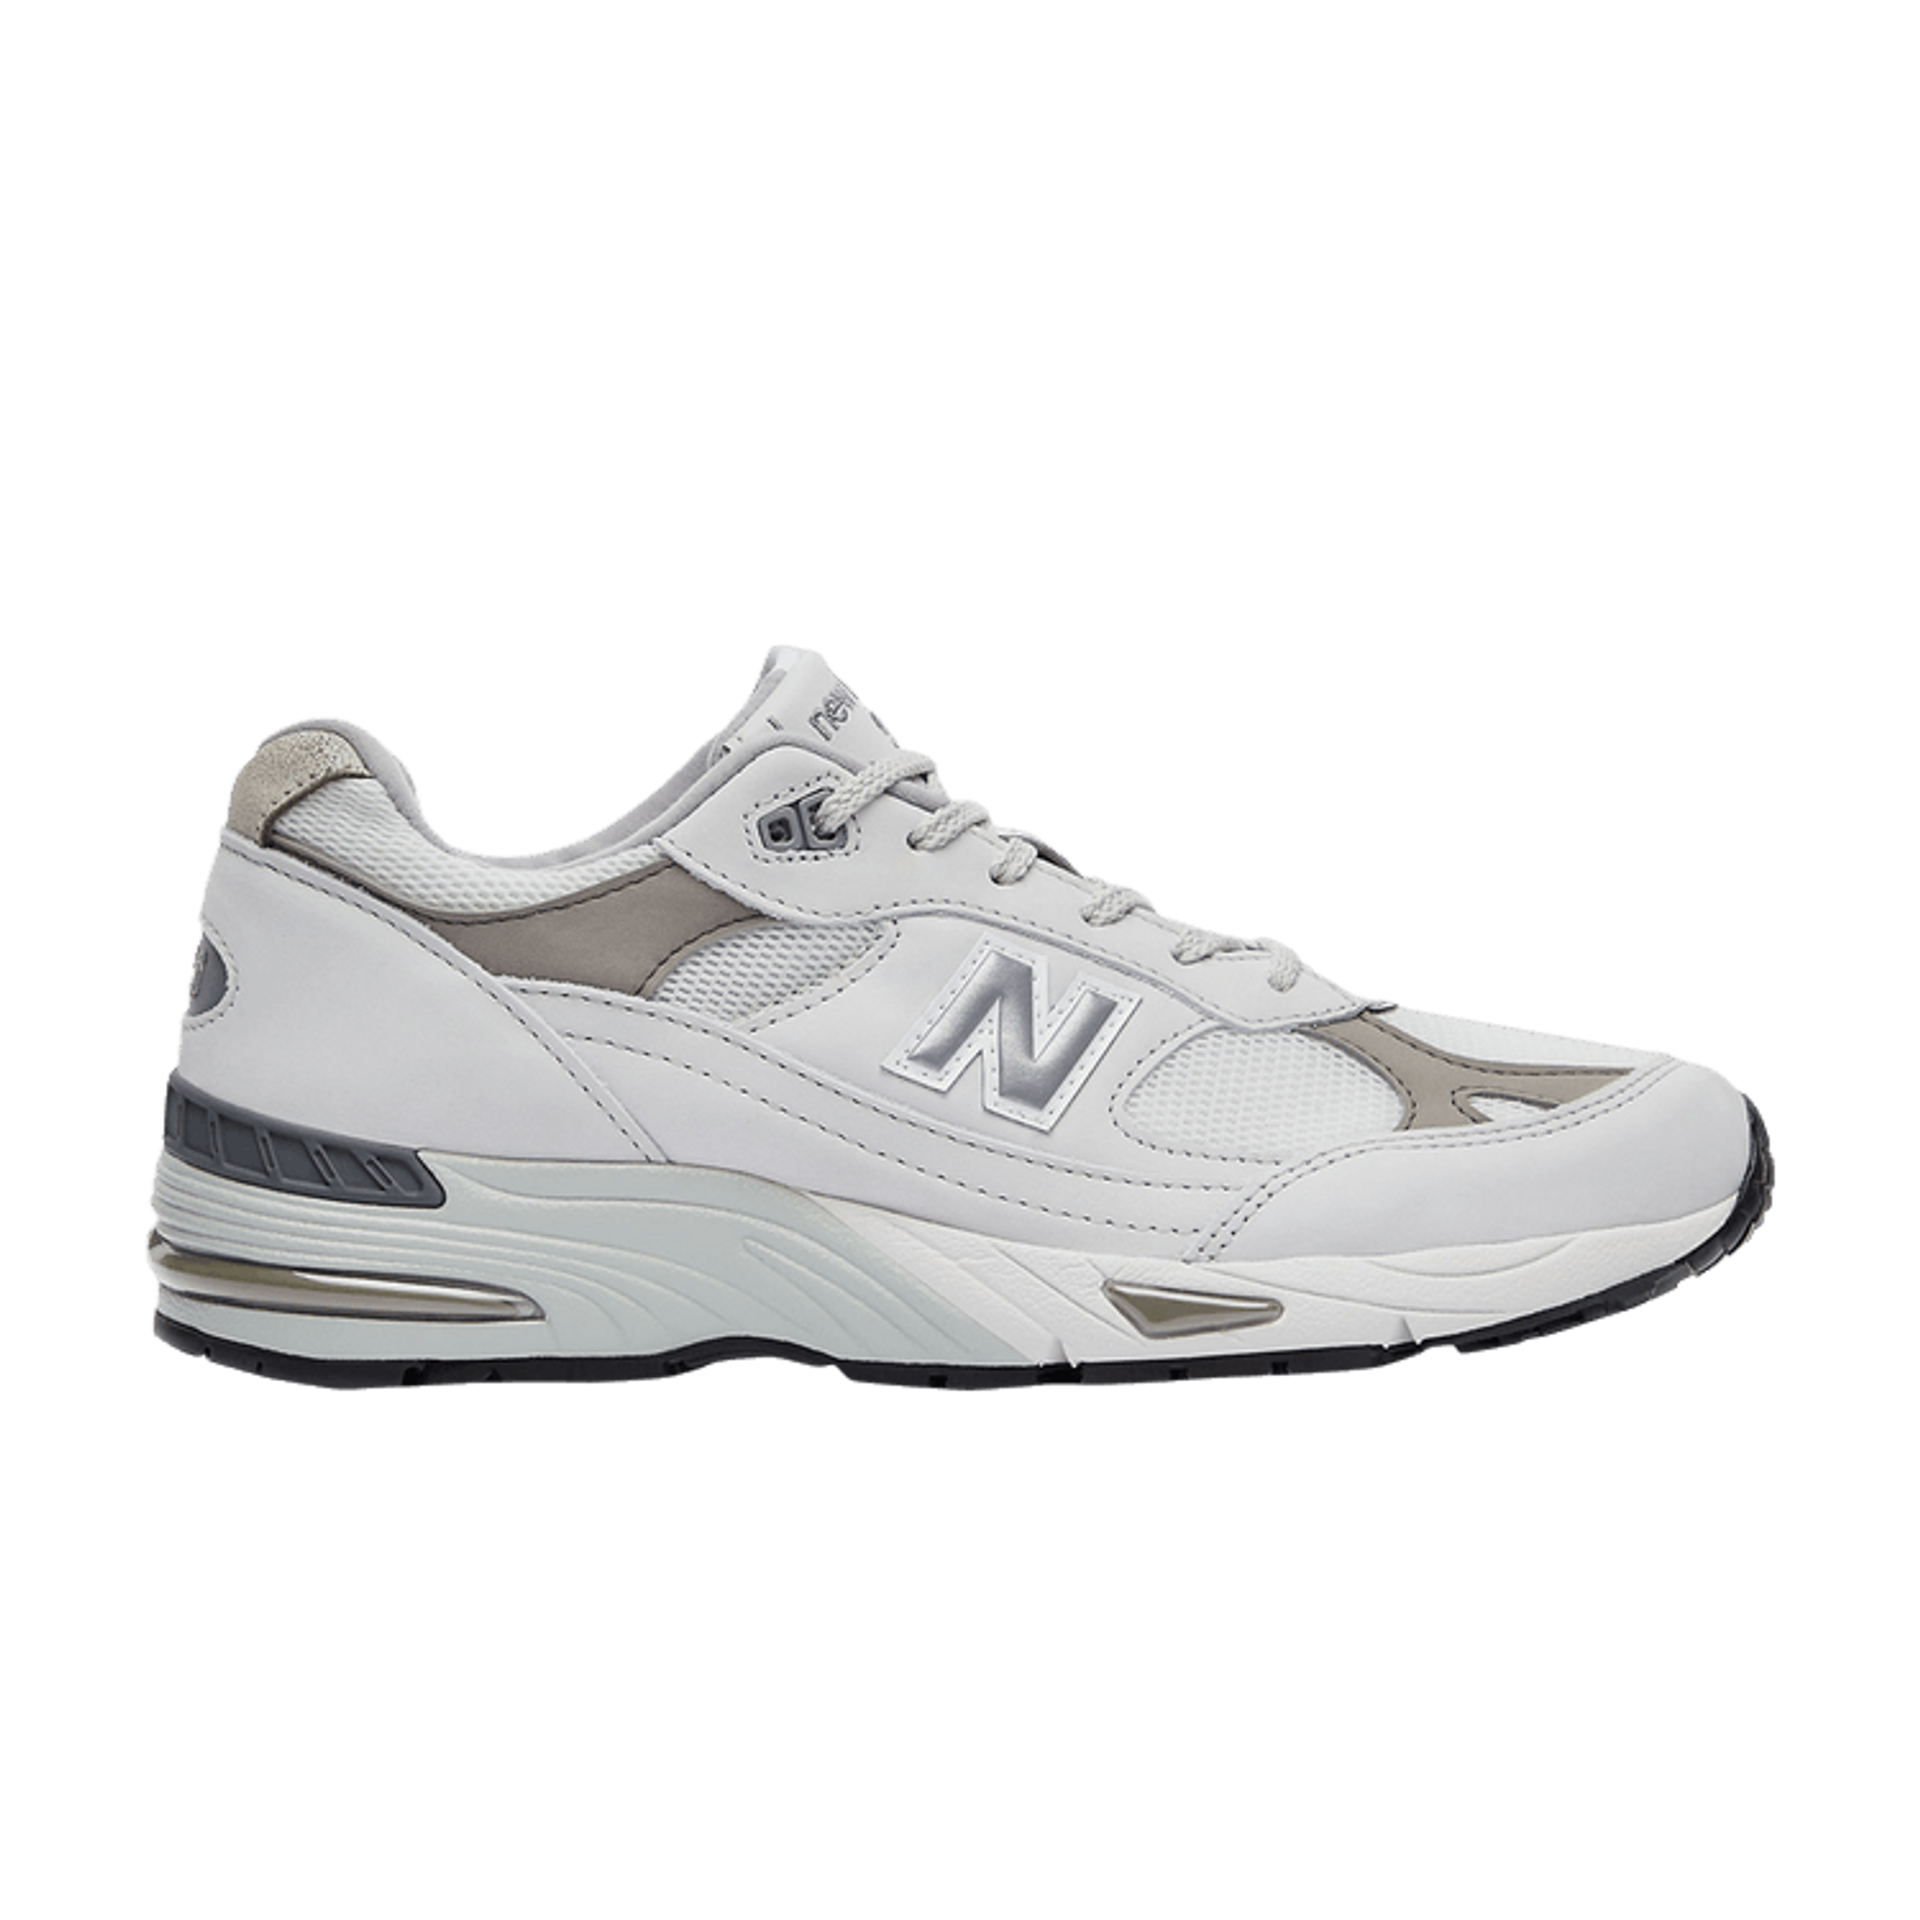 New Balance 991 Made in England 'Star White'